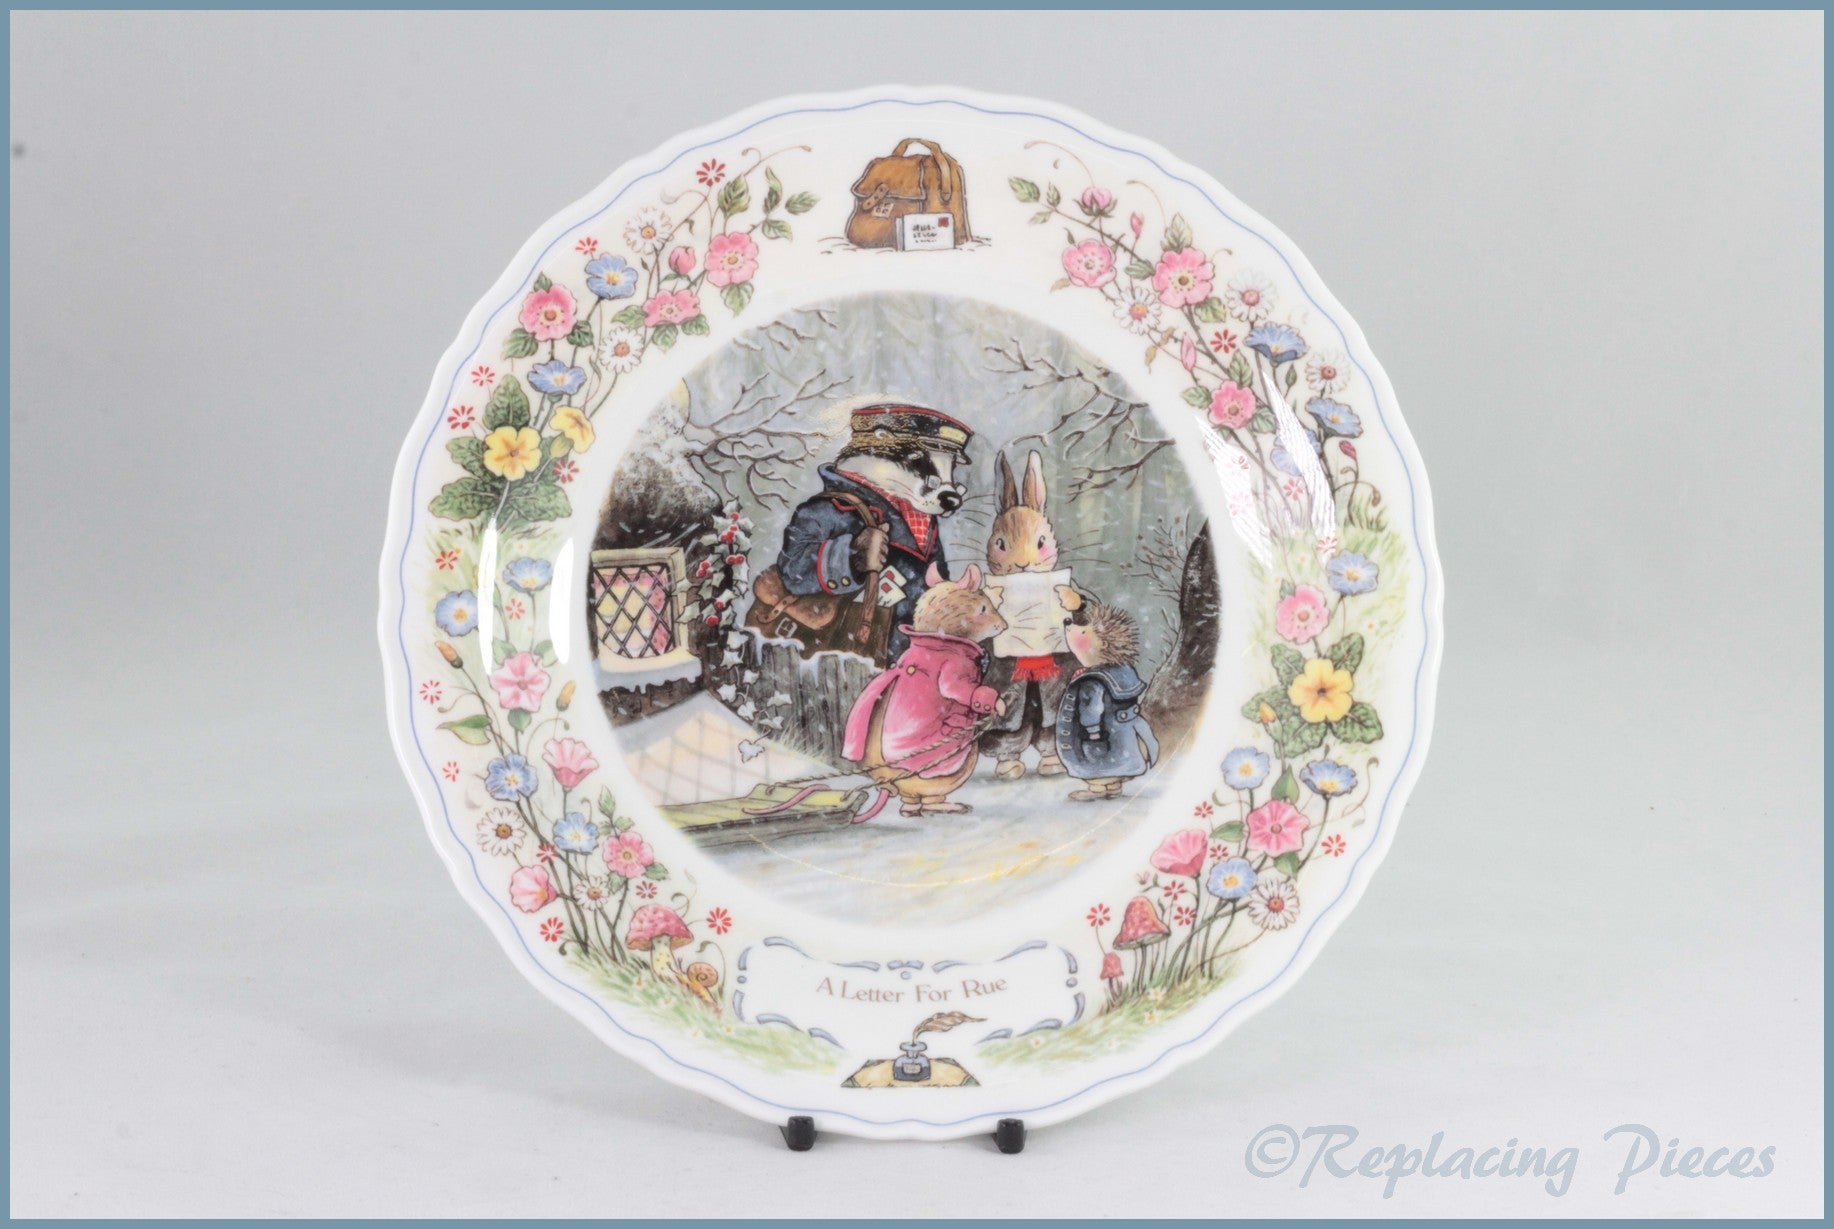 Wedgwood - Foxwood Tales - A Letter For Rue – ReplacingPieces